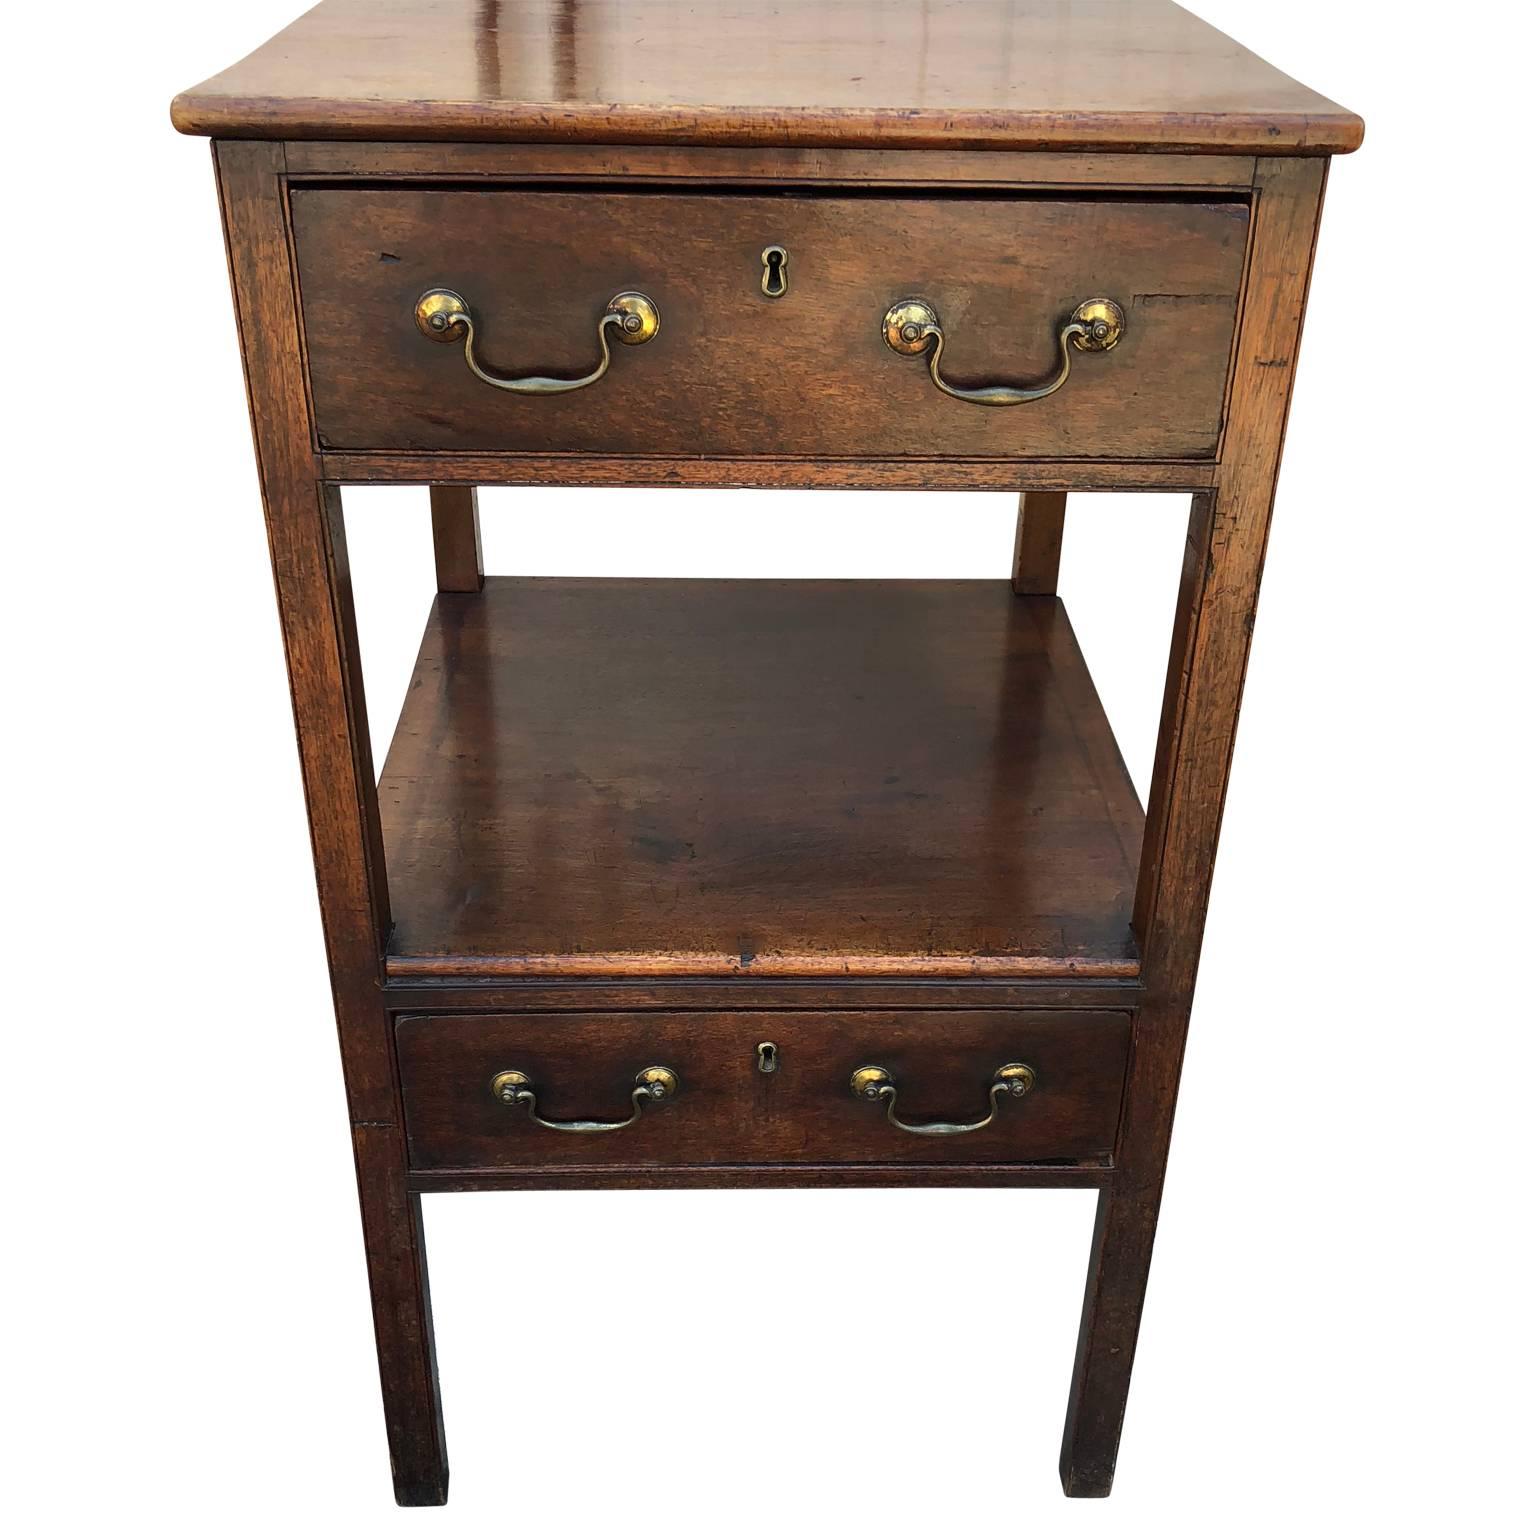 American Empire Tall Two-Drawer Desk or Chest